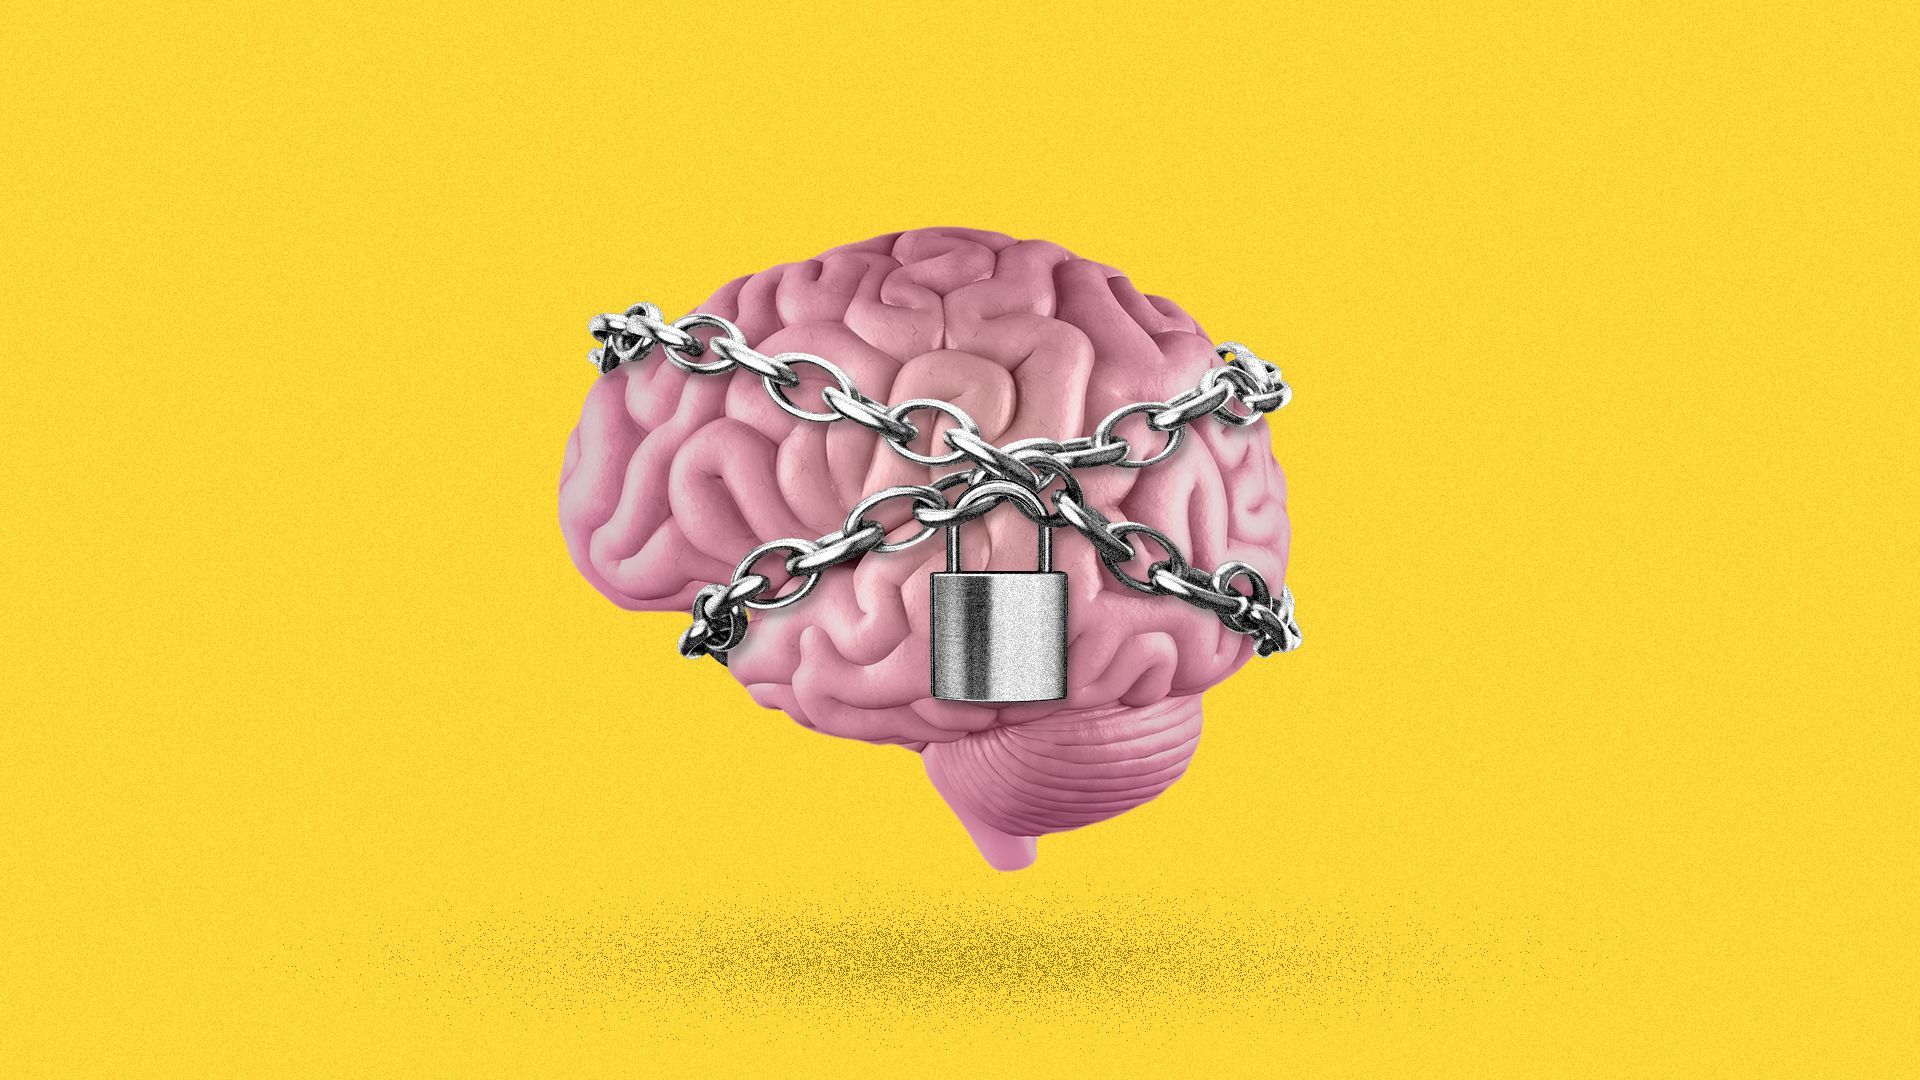 Illustration of a brain wrapped up in a lock and chains.